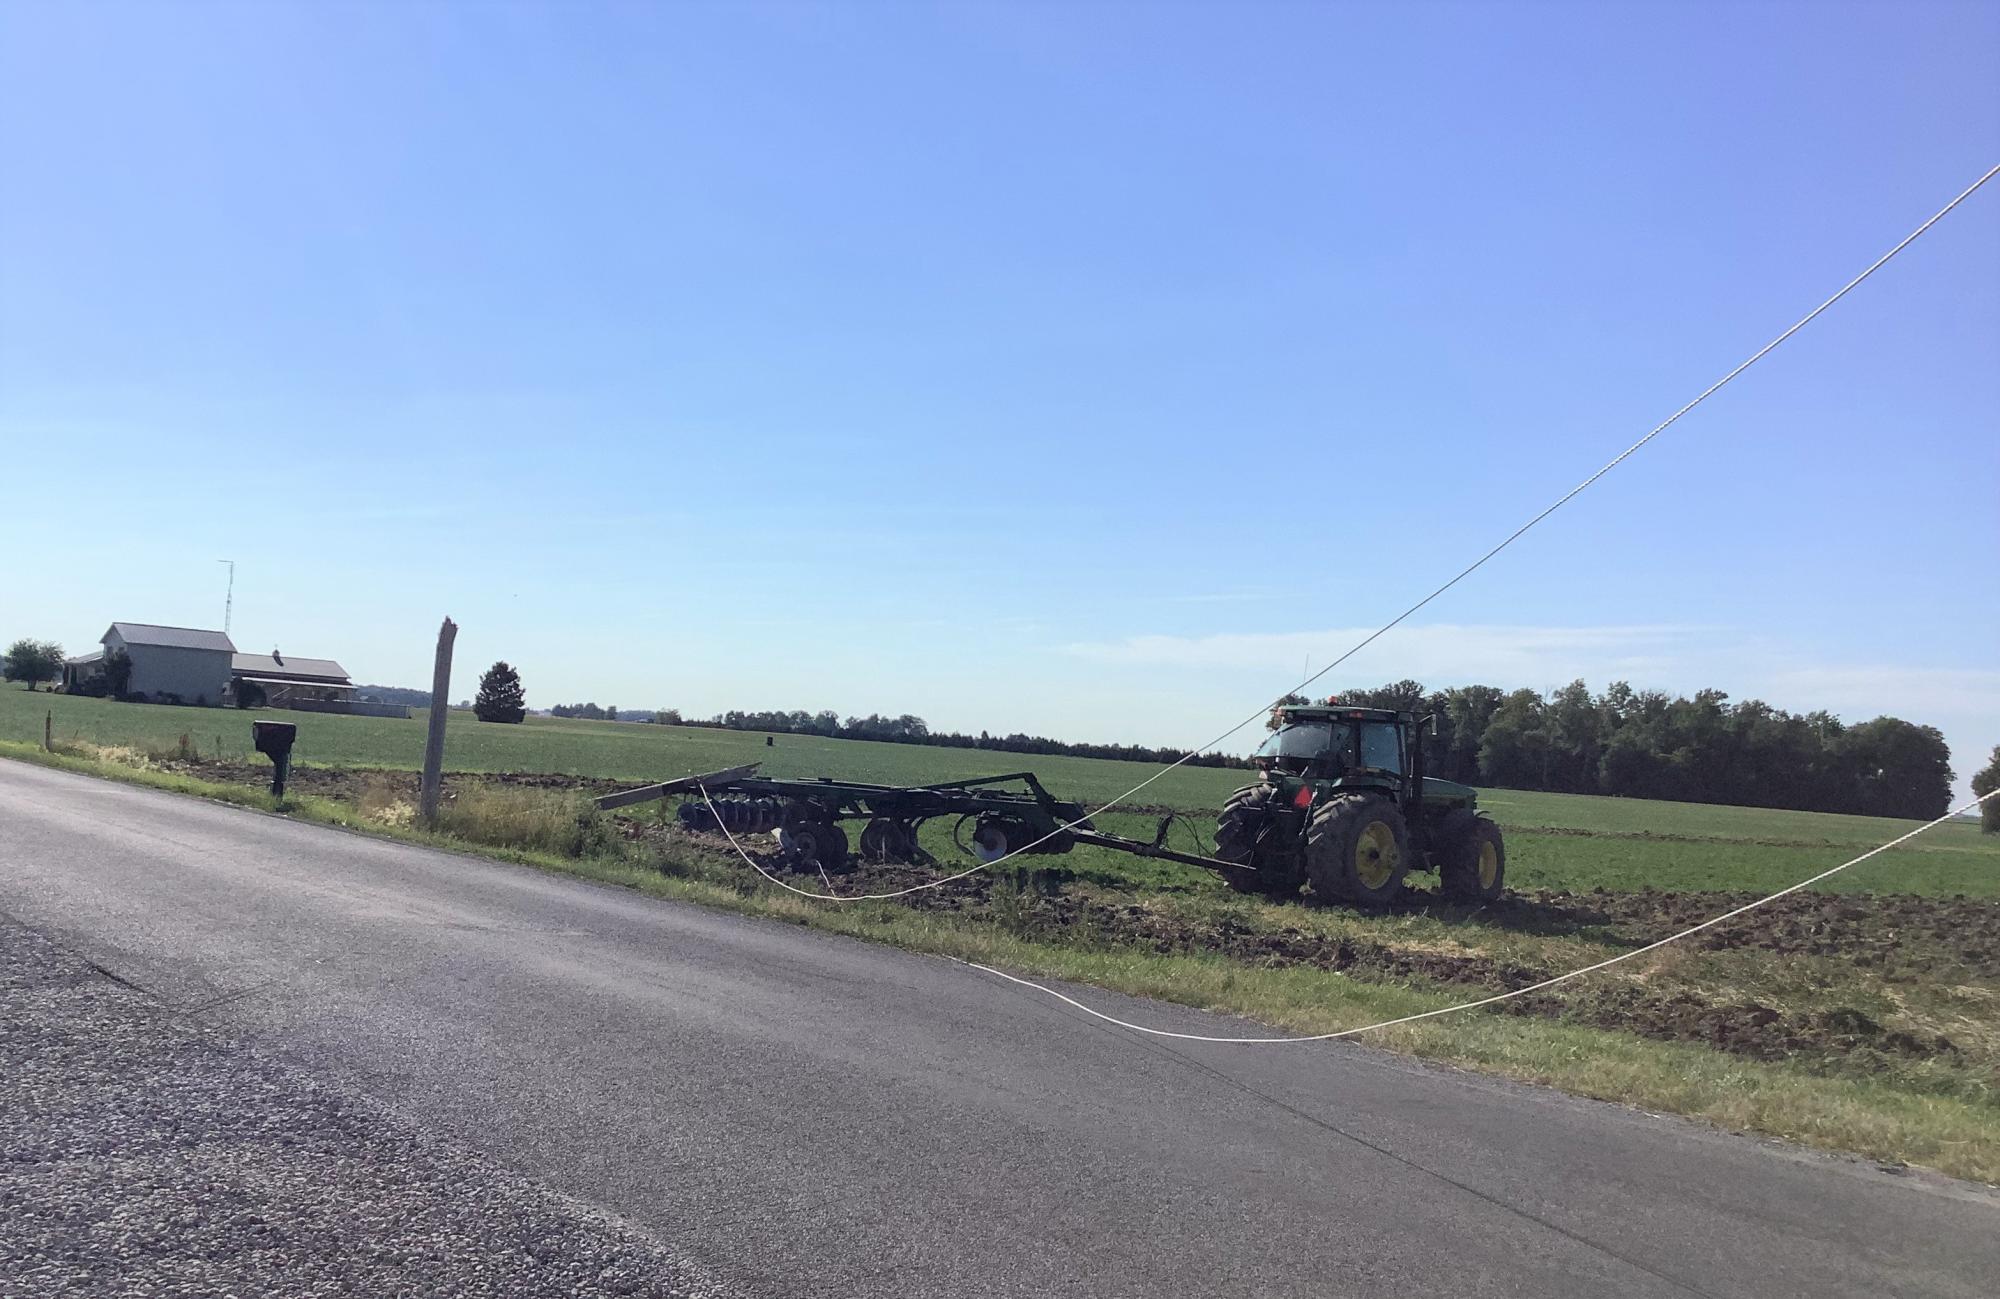 tractor tangled in lines